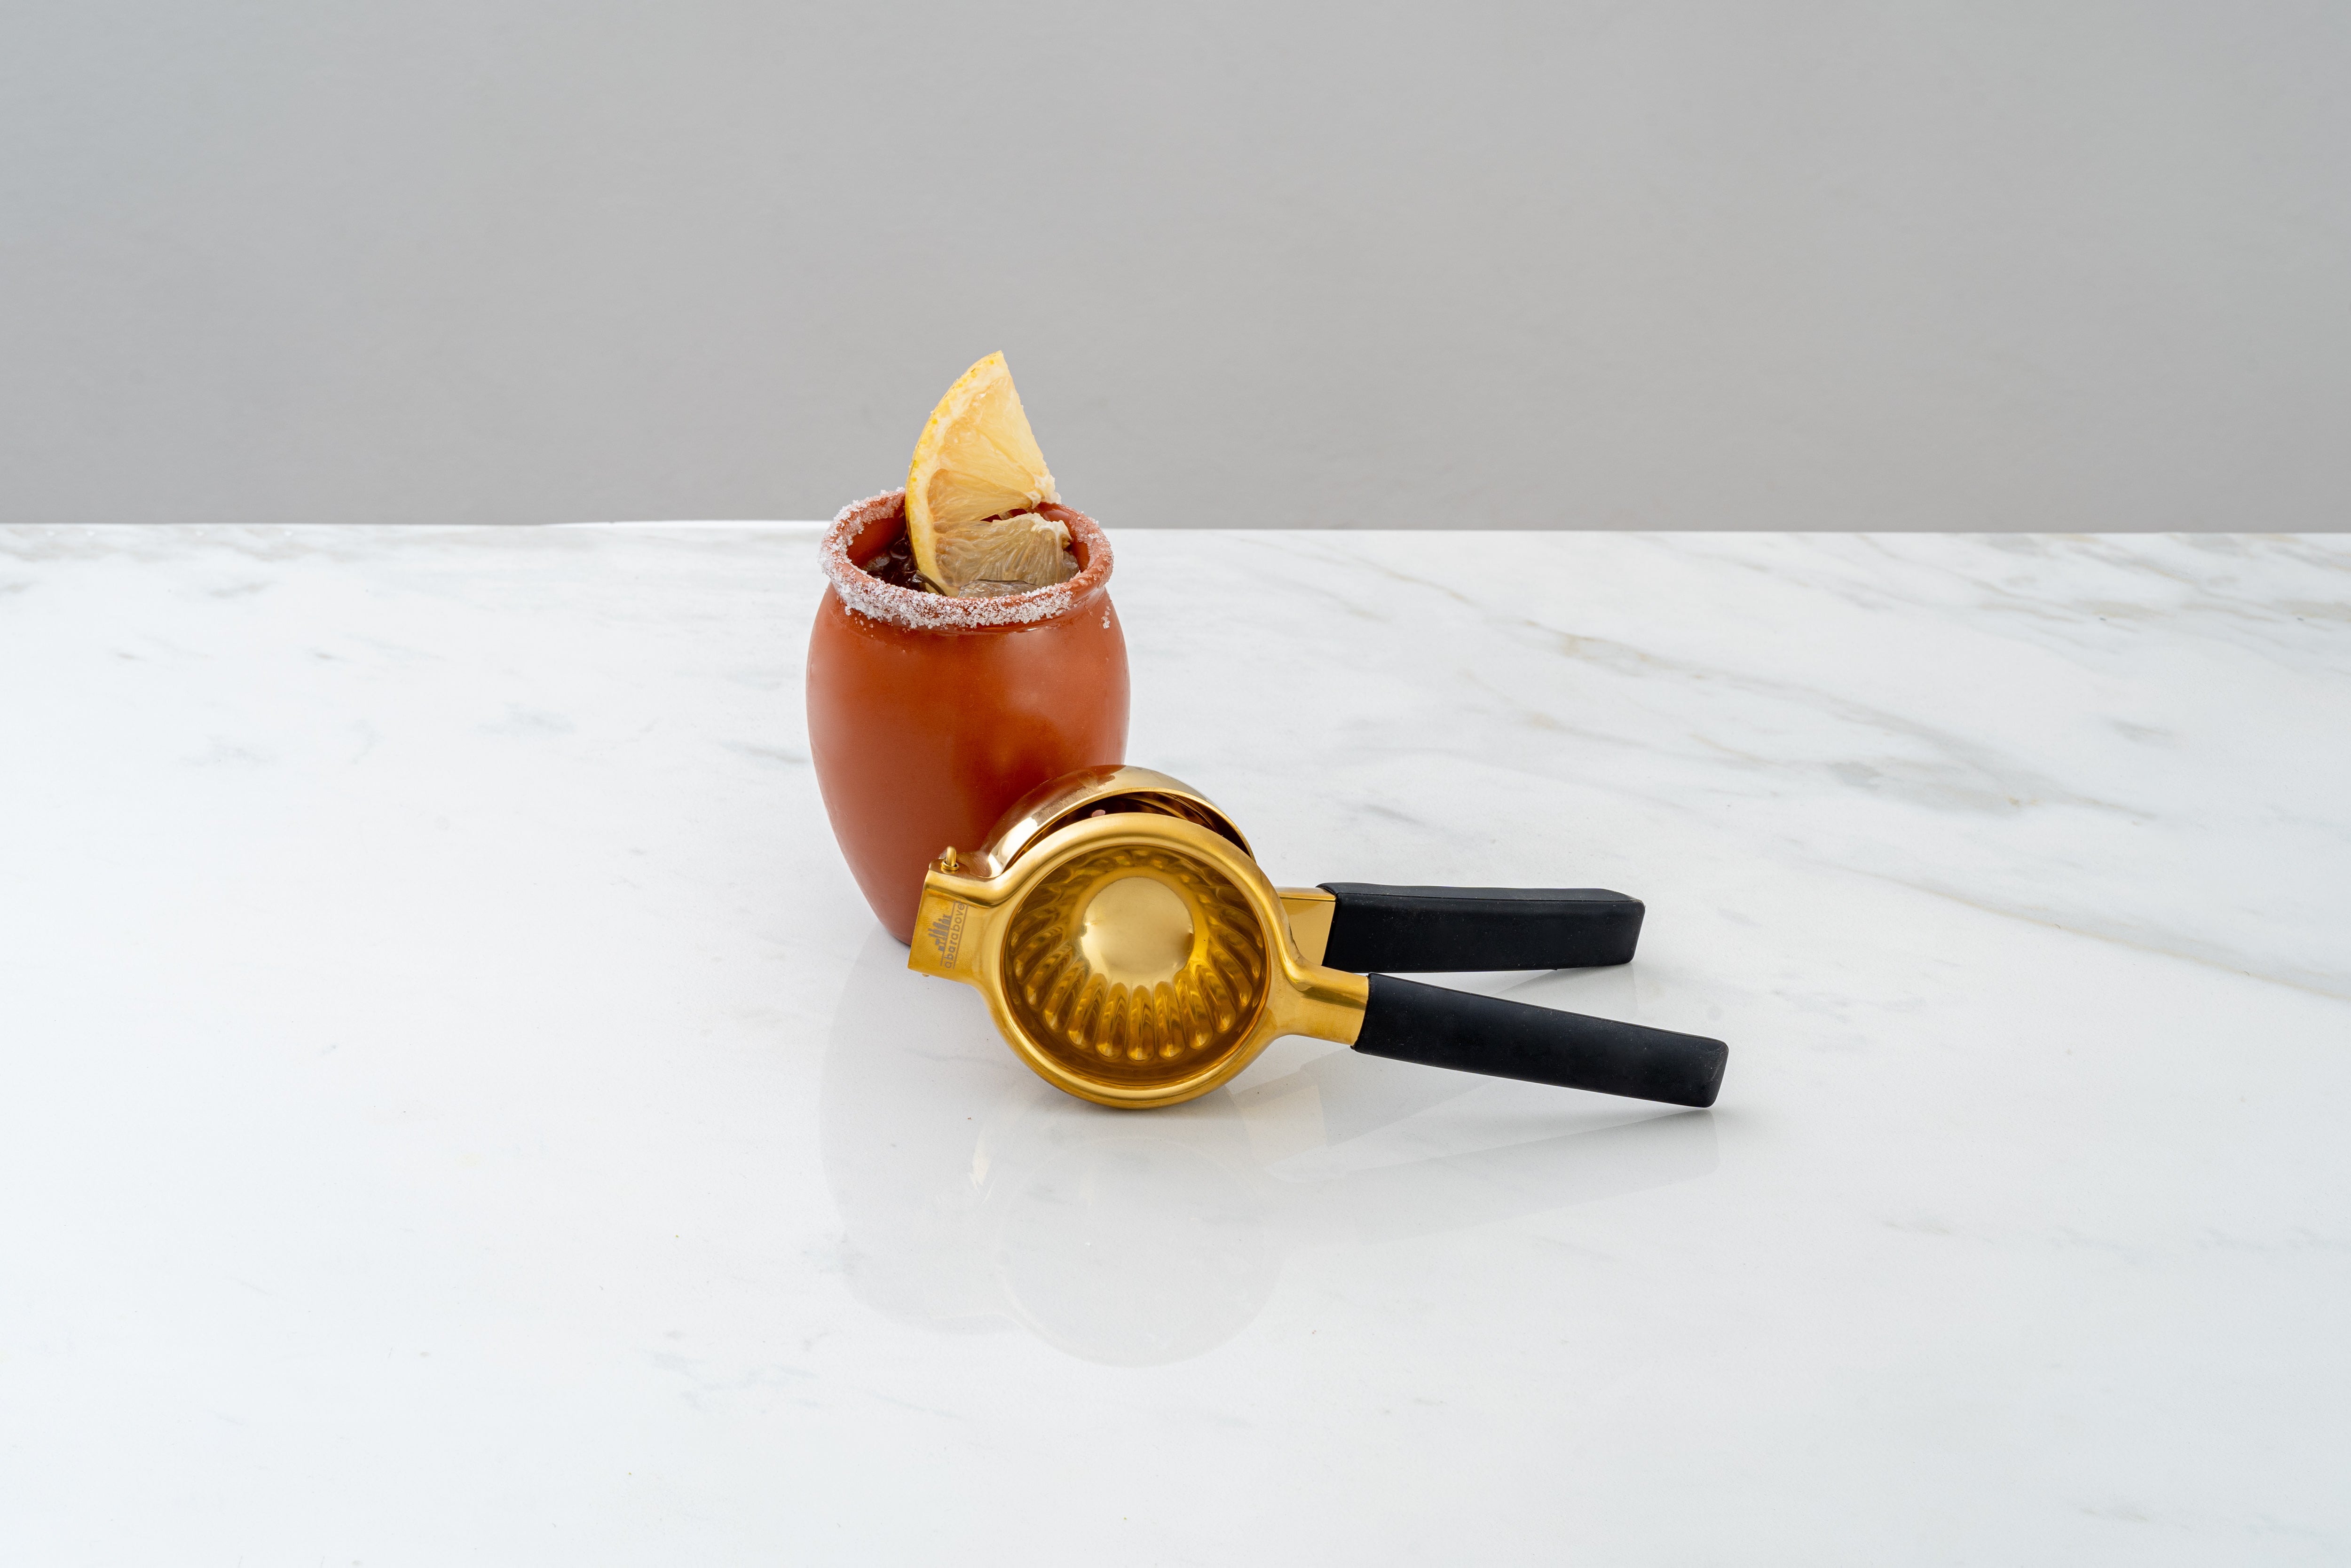 Brown vase-like drink cup with salt rim & lemon garnish, behind a gold citrus juicer with black handles, sitting on a white marble counter